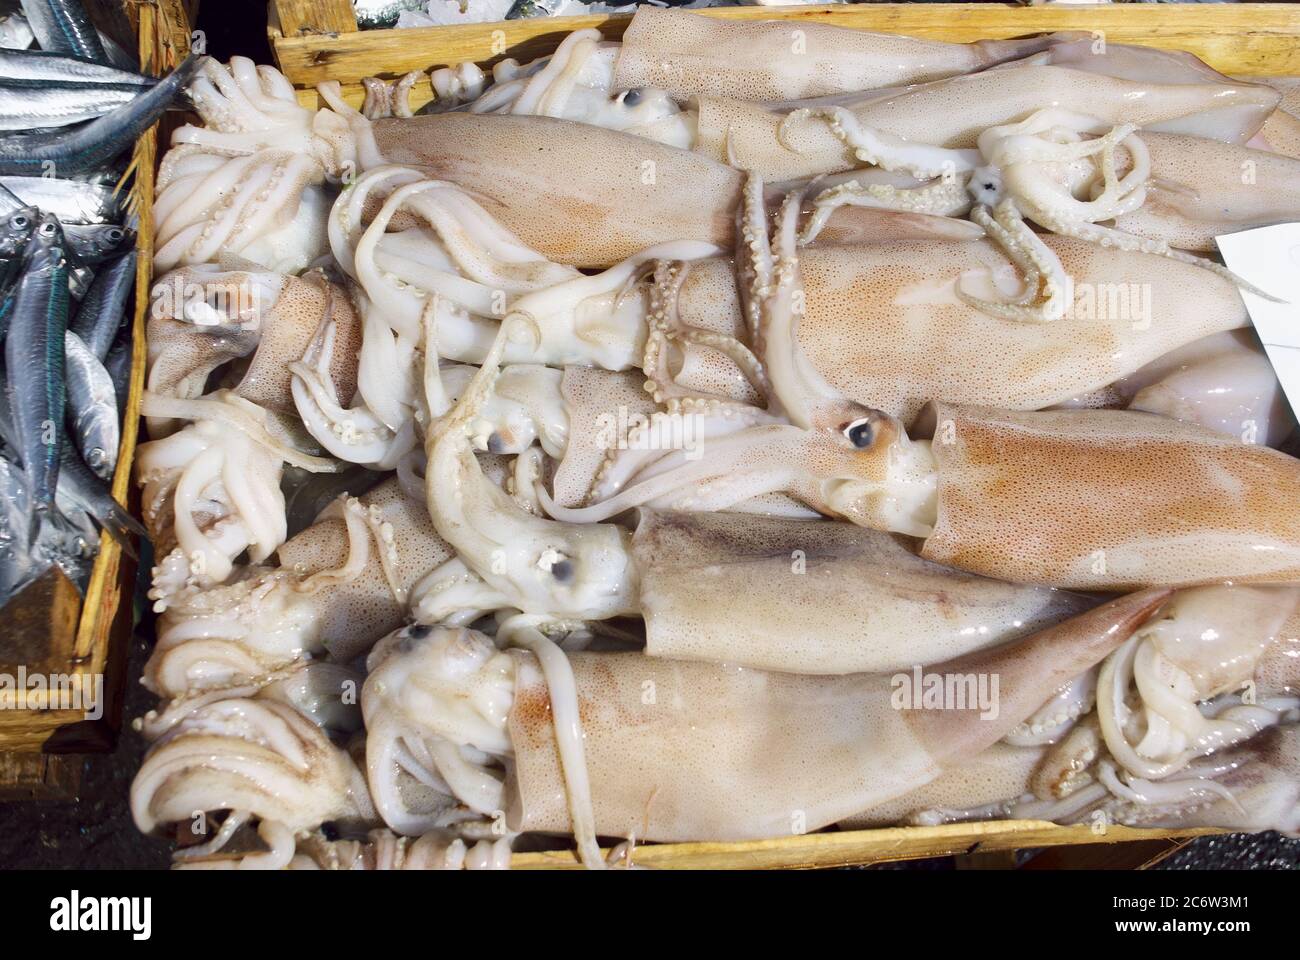 wooden box of squid in Catania fresh fish market, they are a typical food of Sicily from the sea Stock Photo